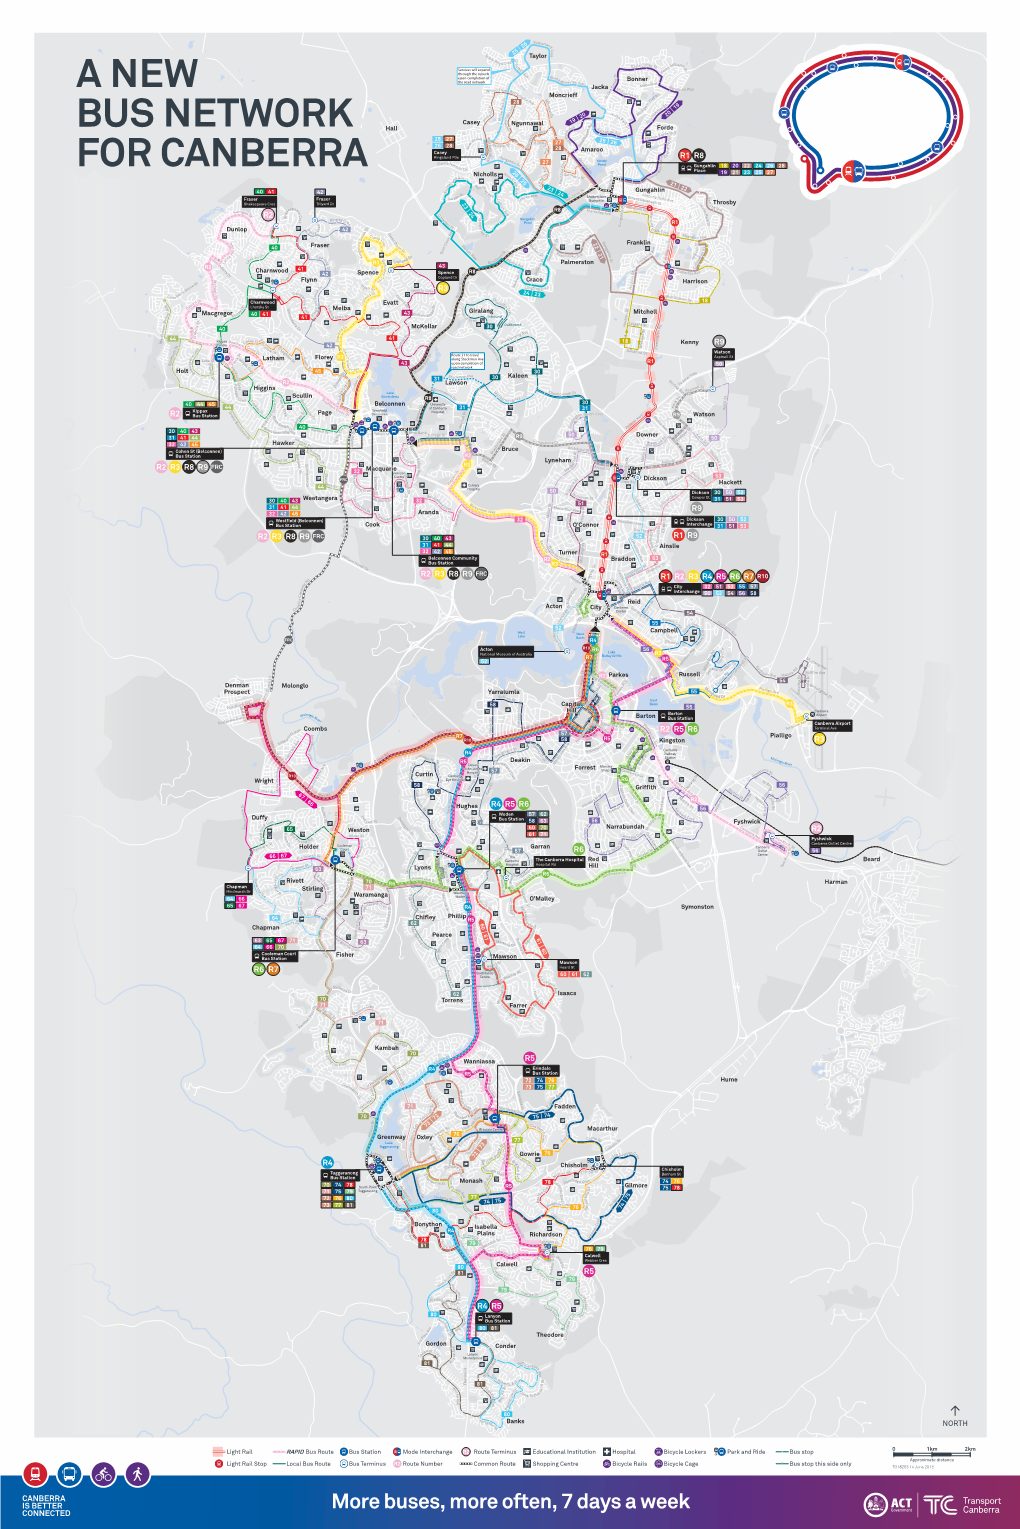 A New Bus Network for Canberra